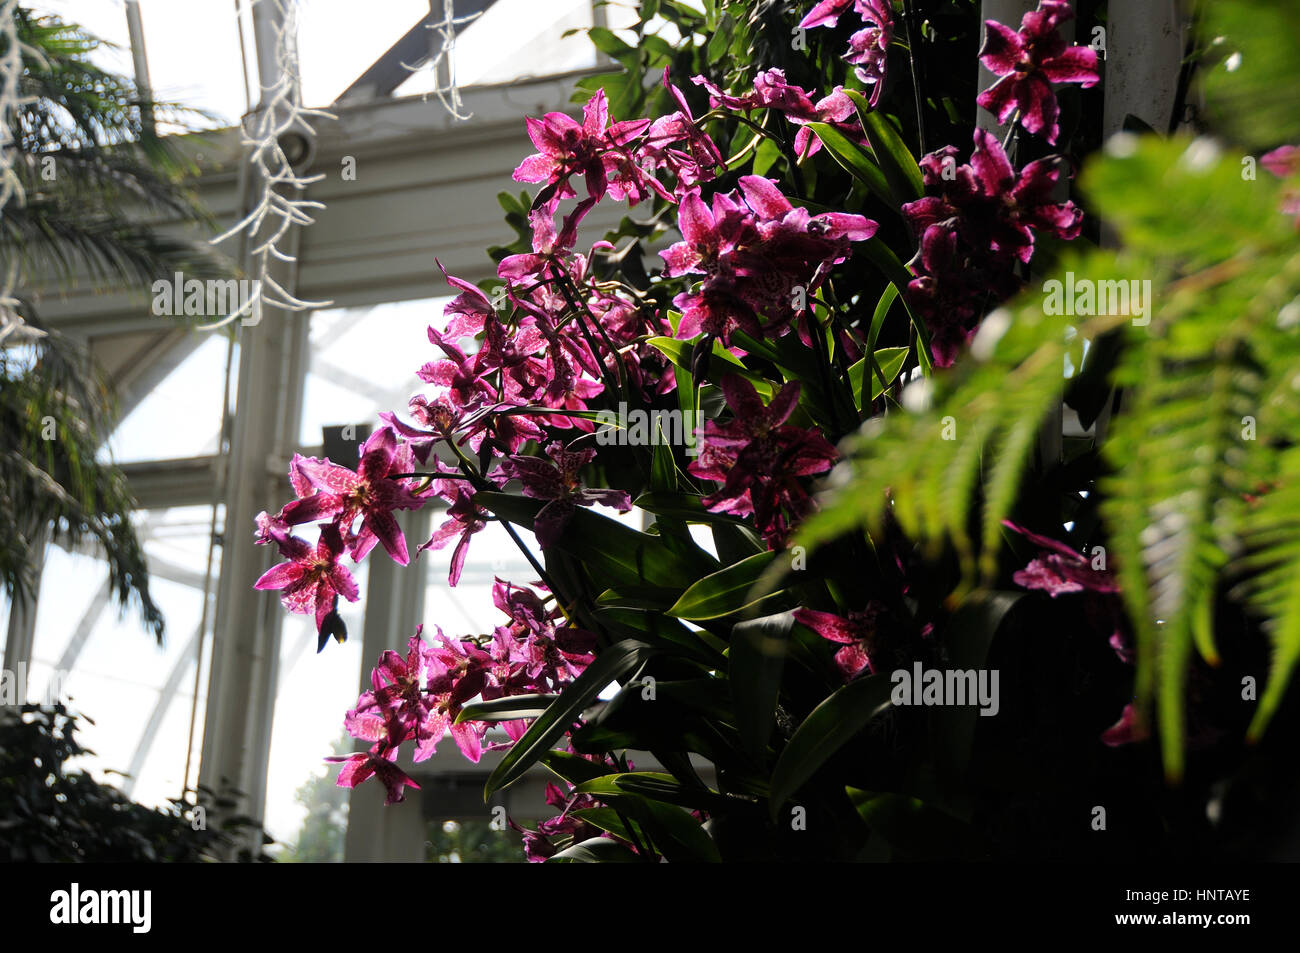 New York, USA, 16th February. Pink Odontoglossum orchids in the Palms of the World Gallery of the Enid A. Haupt Conservatory at the New York Botanical Garden's orchid show paying hoimage to Thailand's wealth of orchids. Susanne Masters / Alamy Live News Stock Photo